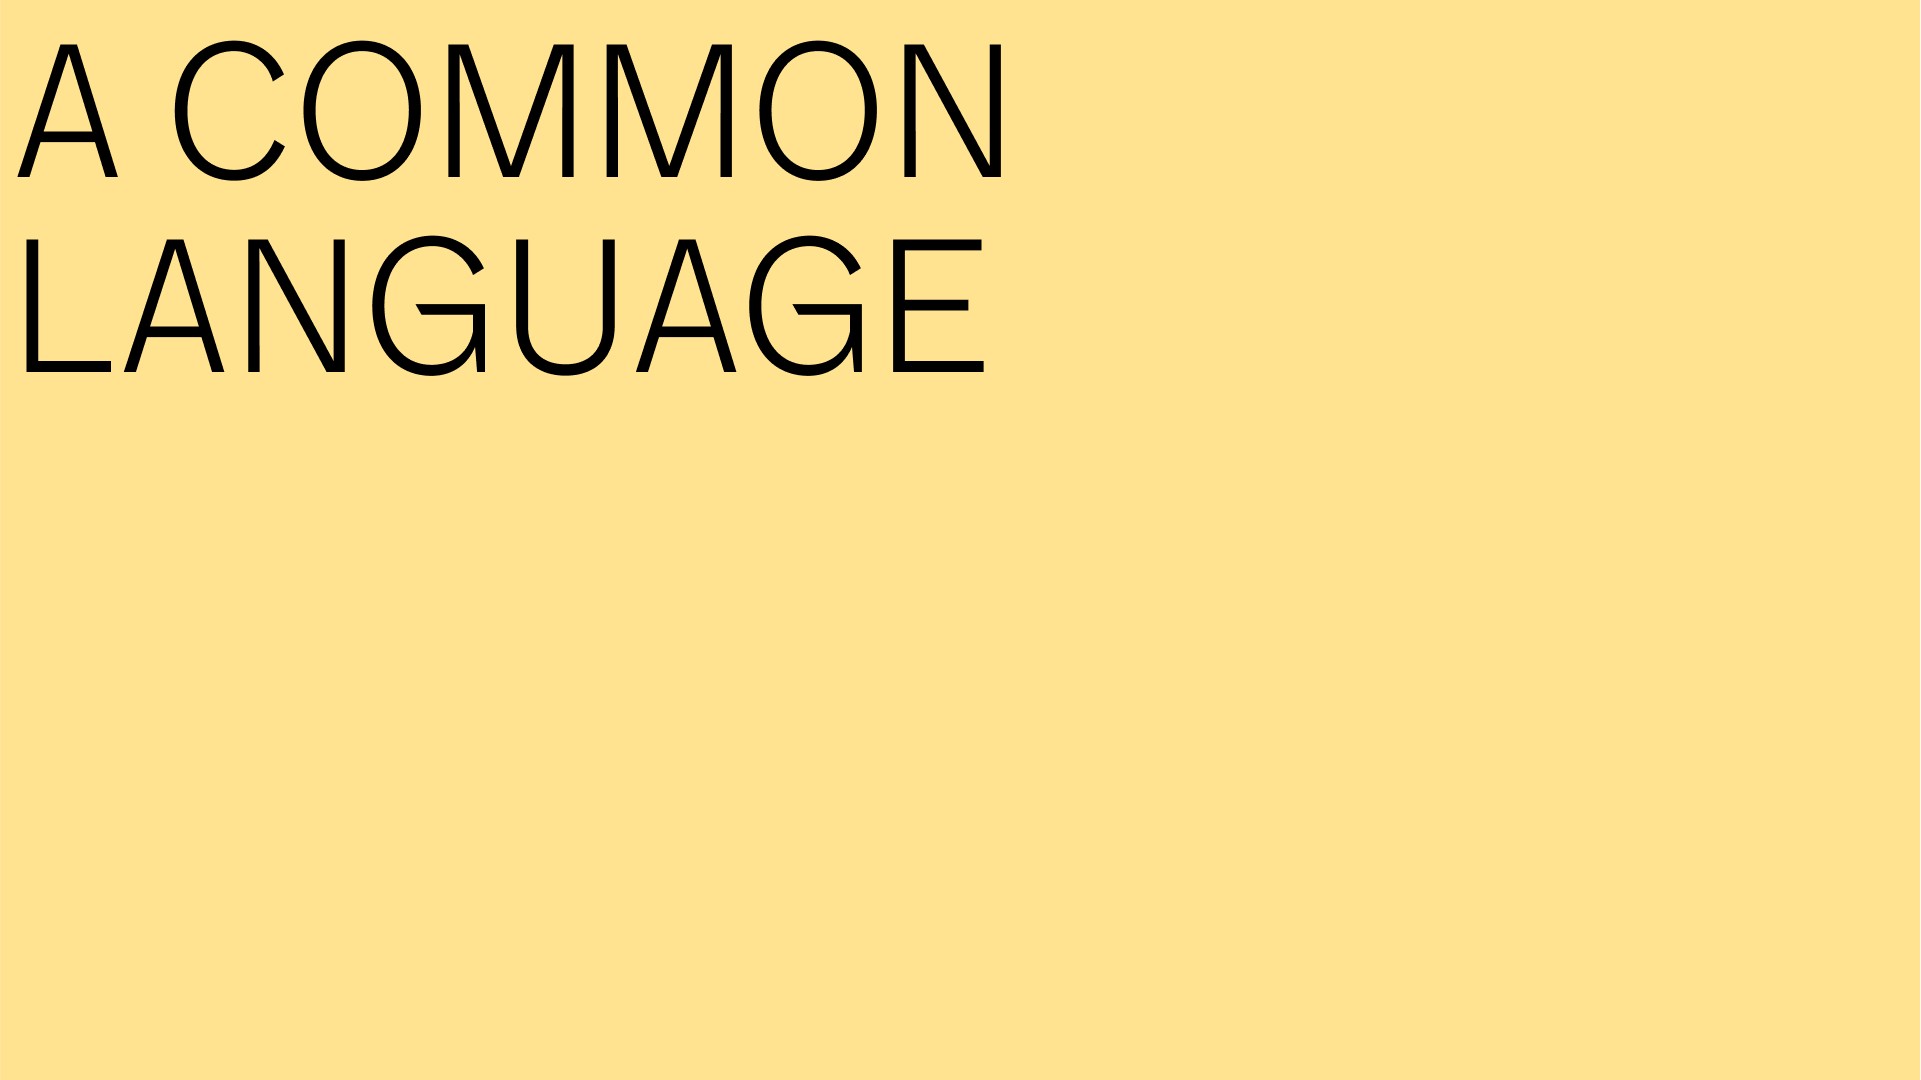 Cover slide that reads 'A common language'